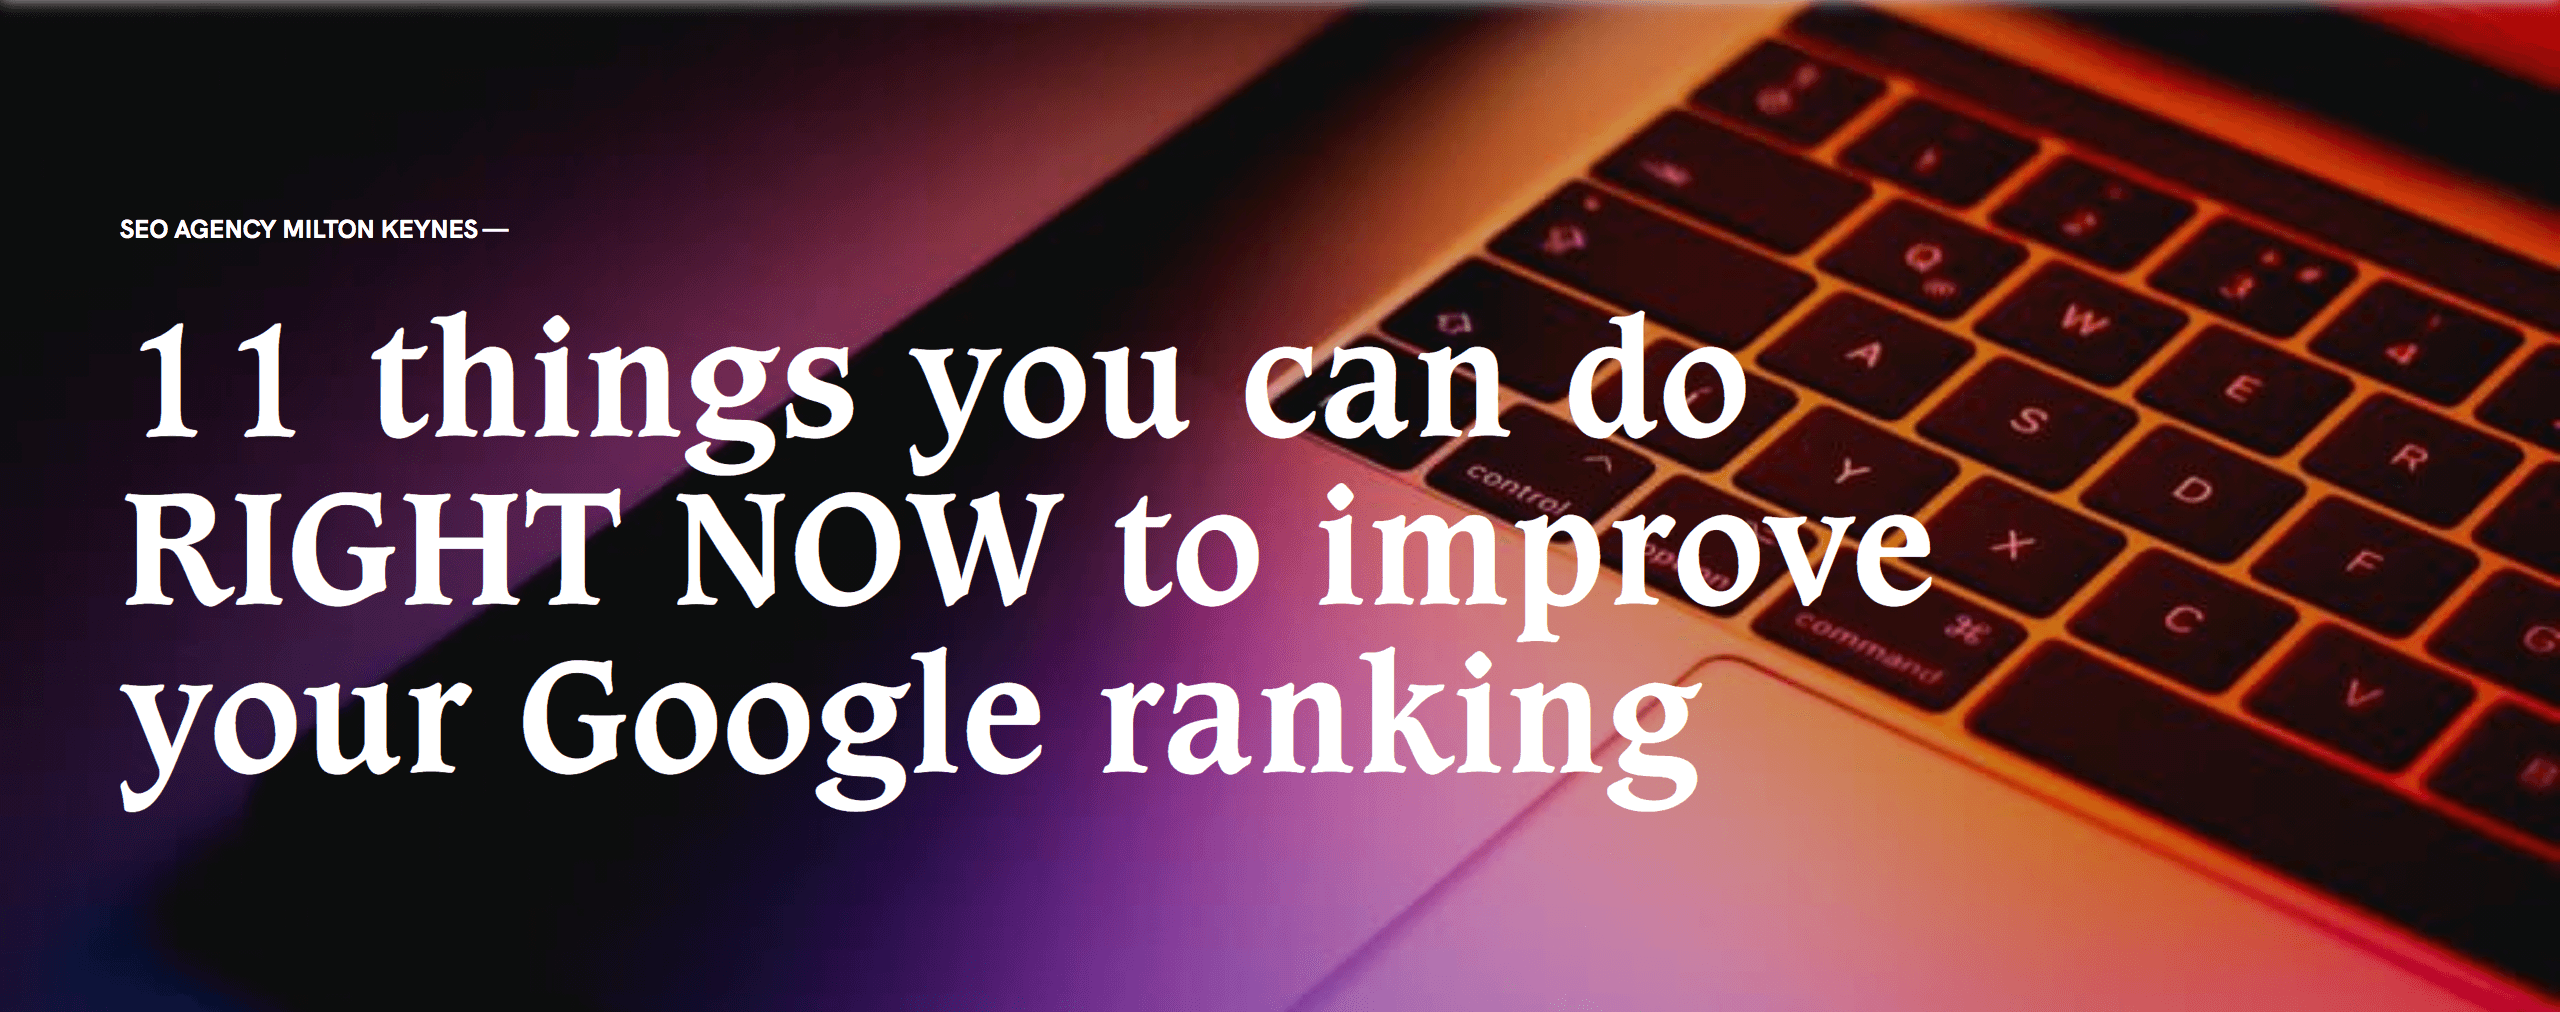 11 things to improve your google ranking header image